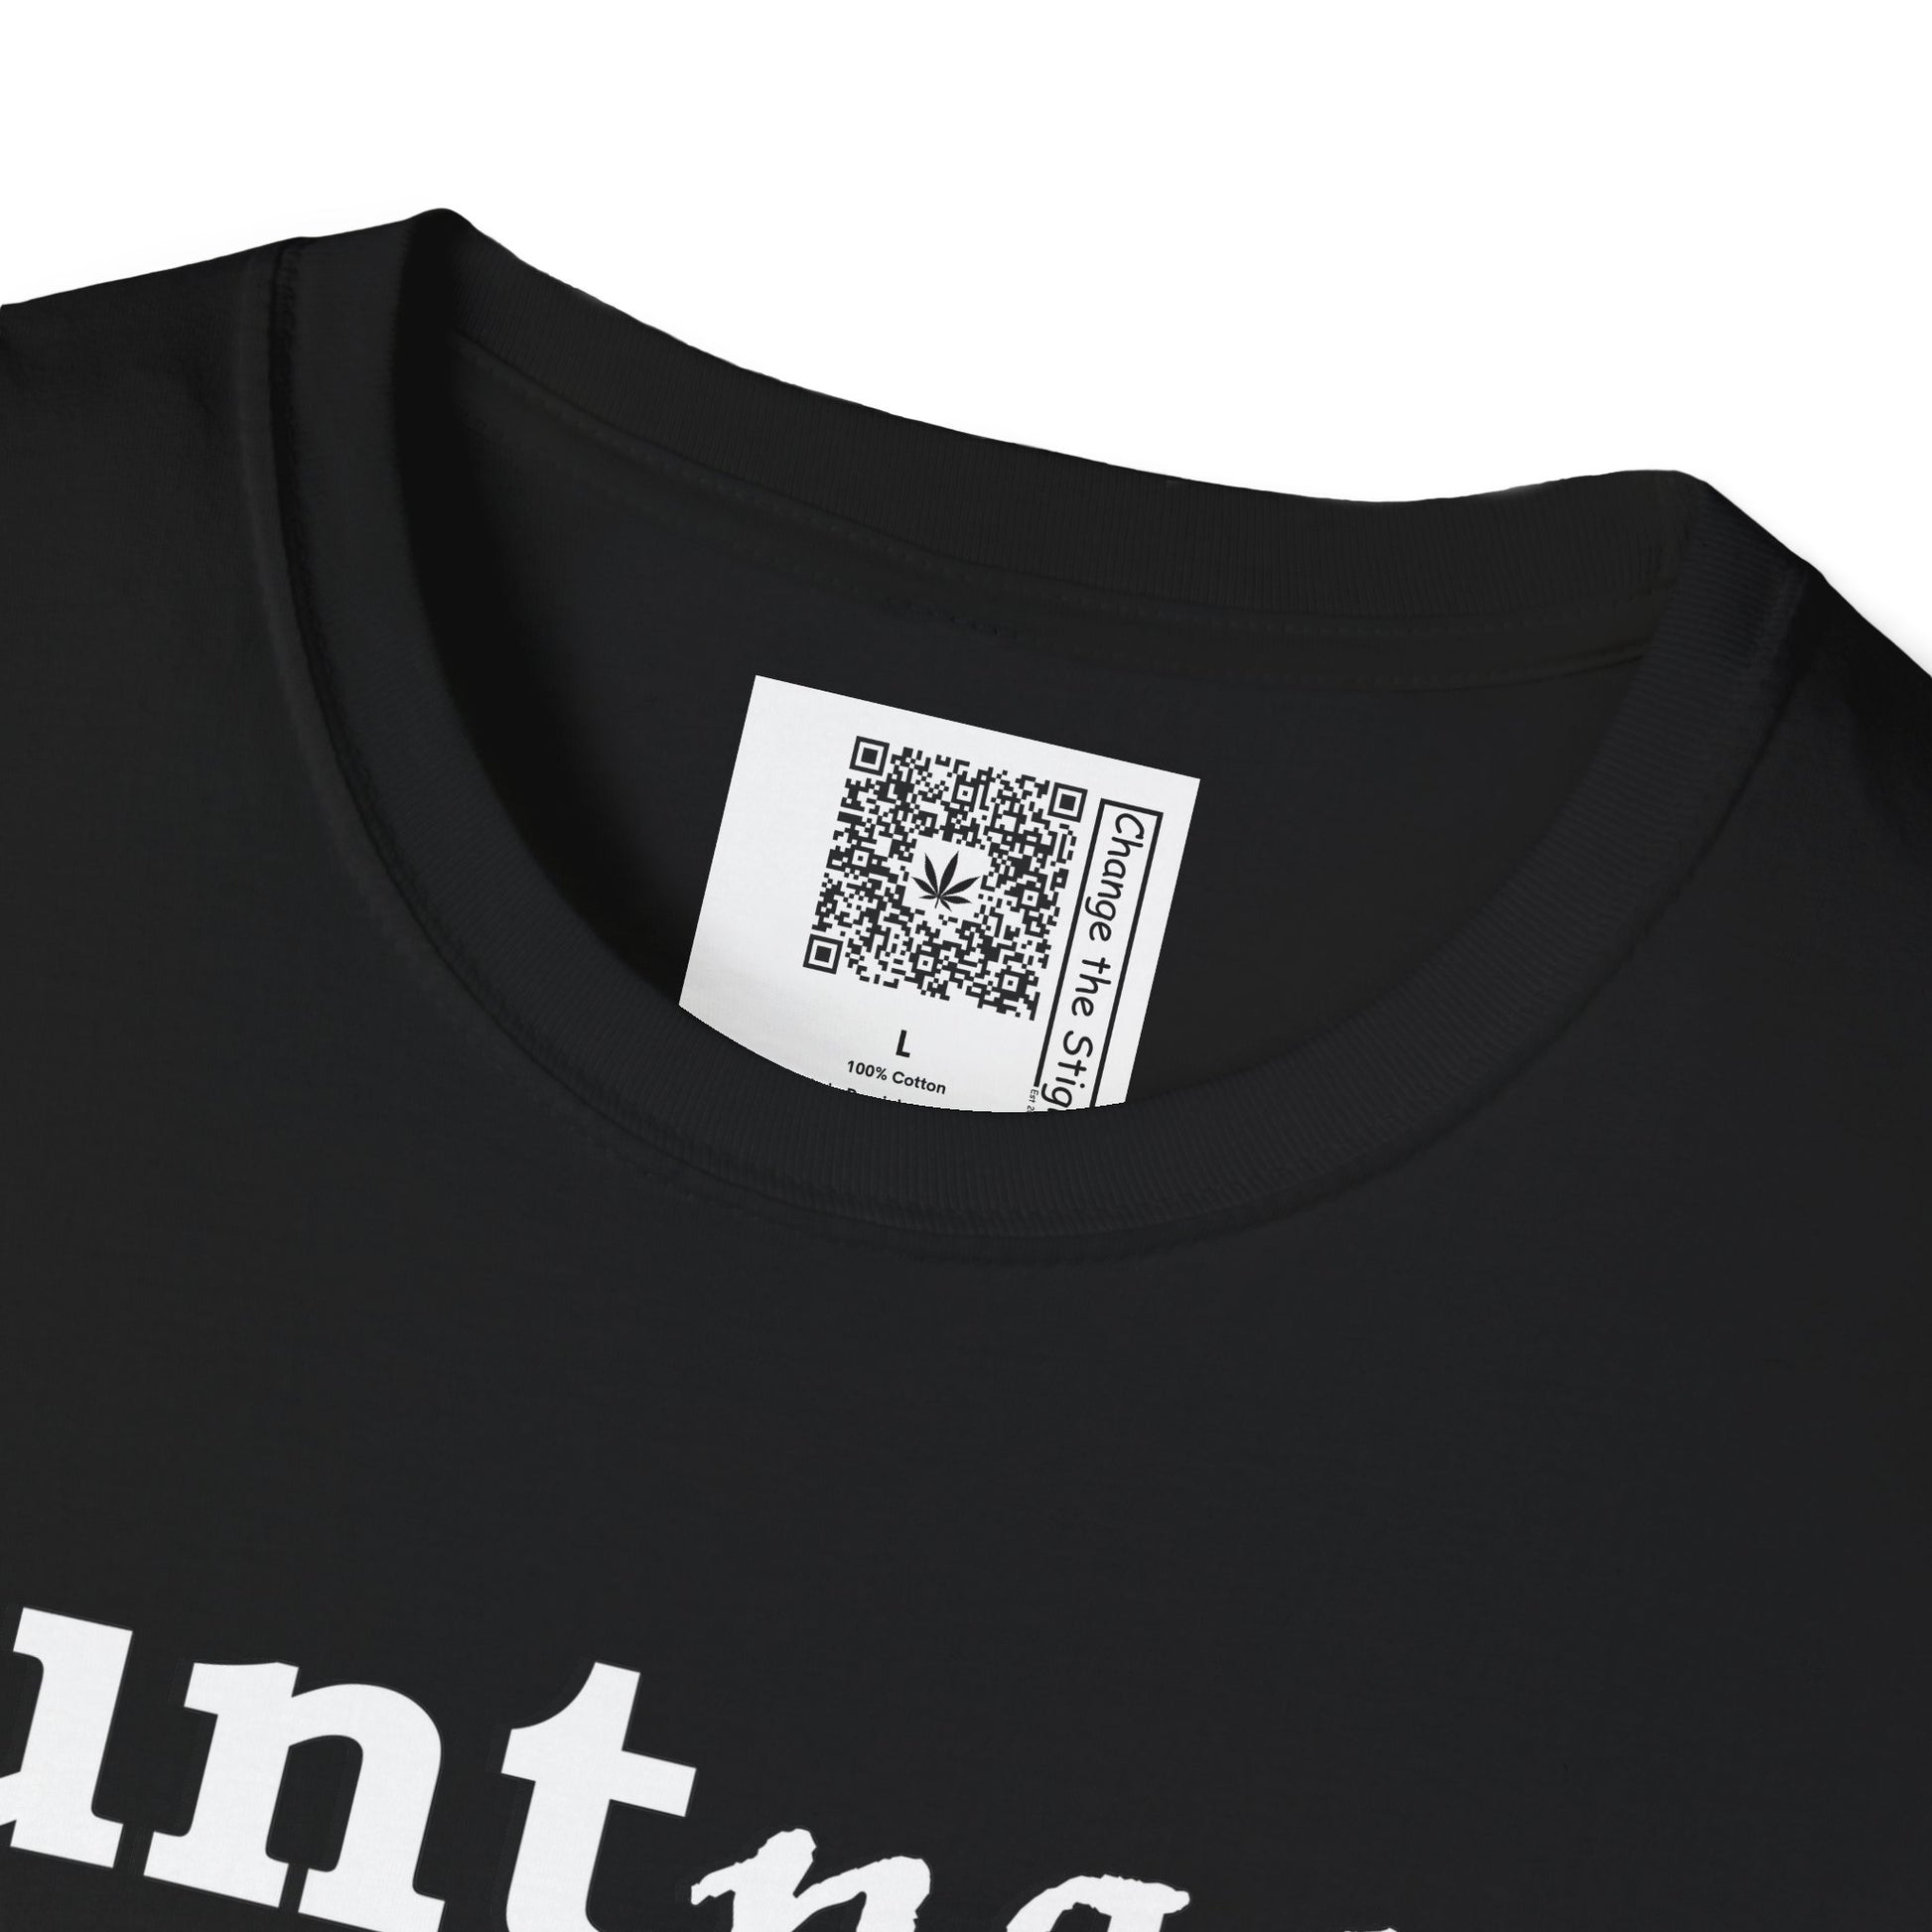 Change the Stigma, Black color, shirt saying "blunt passer", Shirt is open displayed, Qr code is shown neck tag